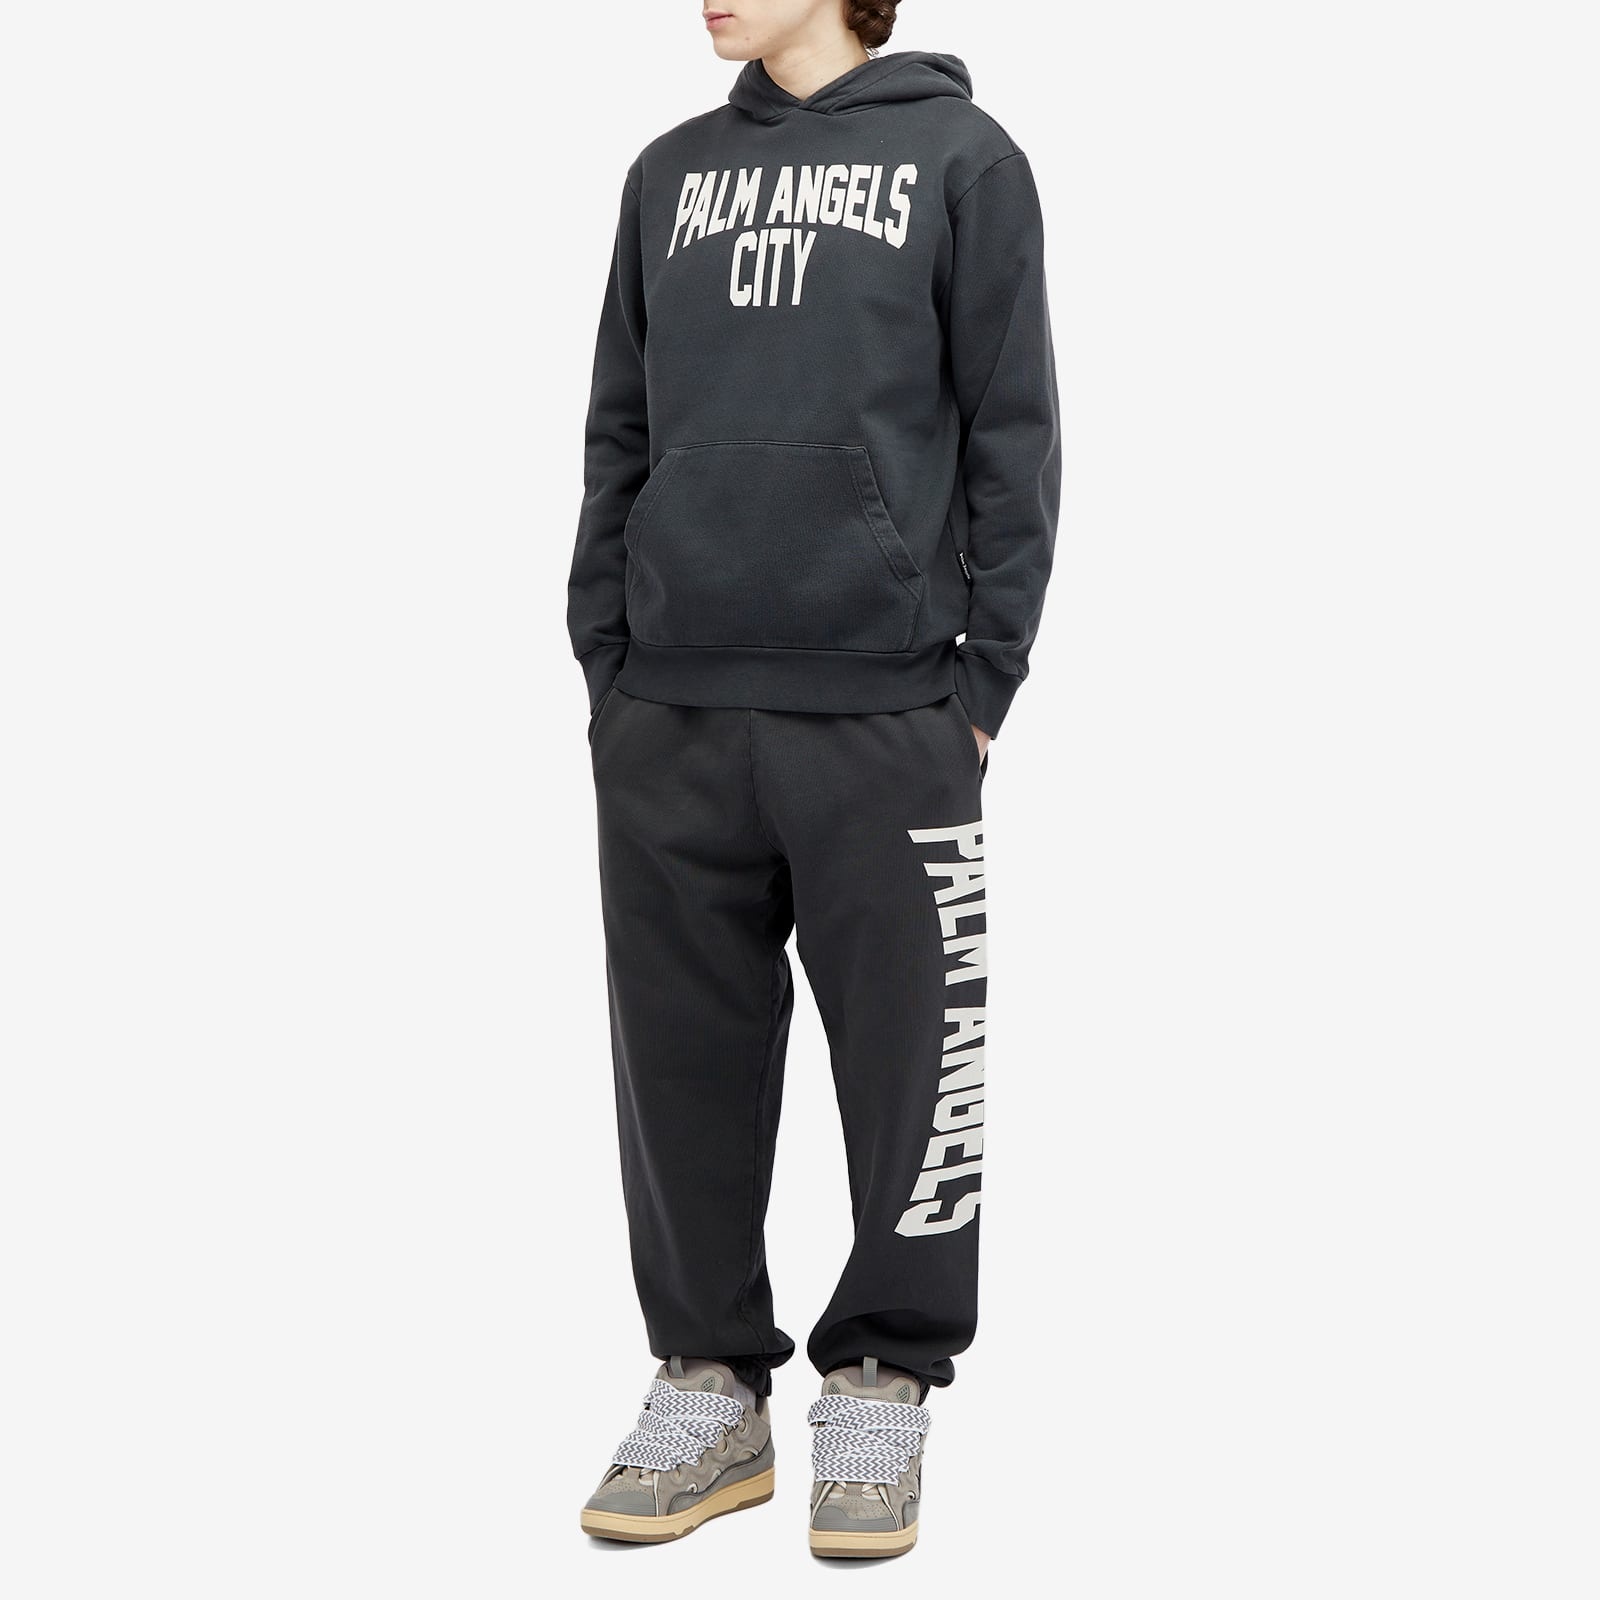 Palm Angels PA City Popover Hoody - 4